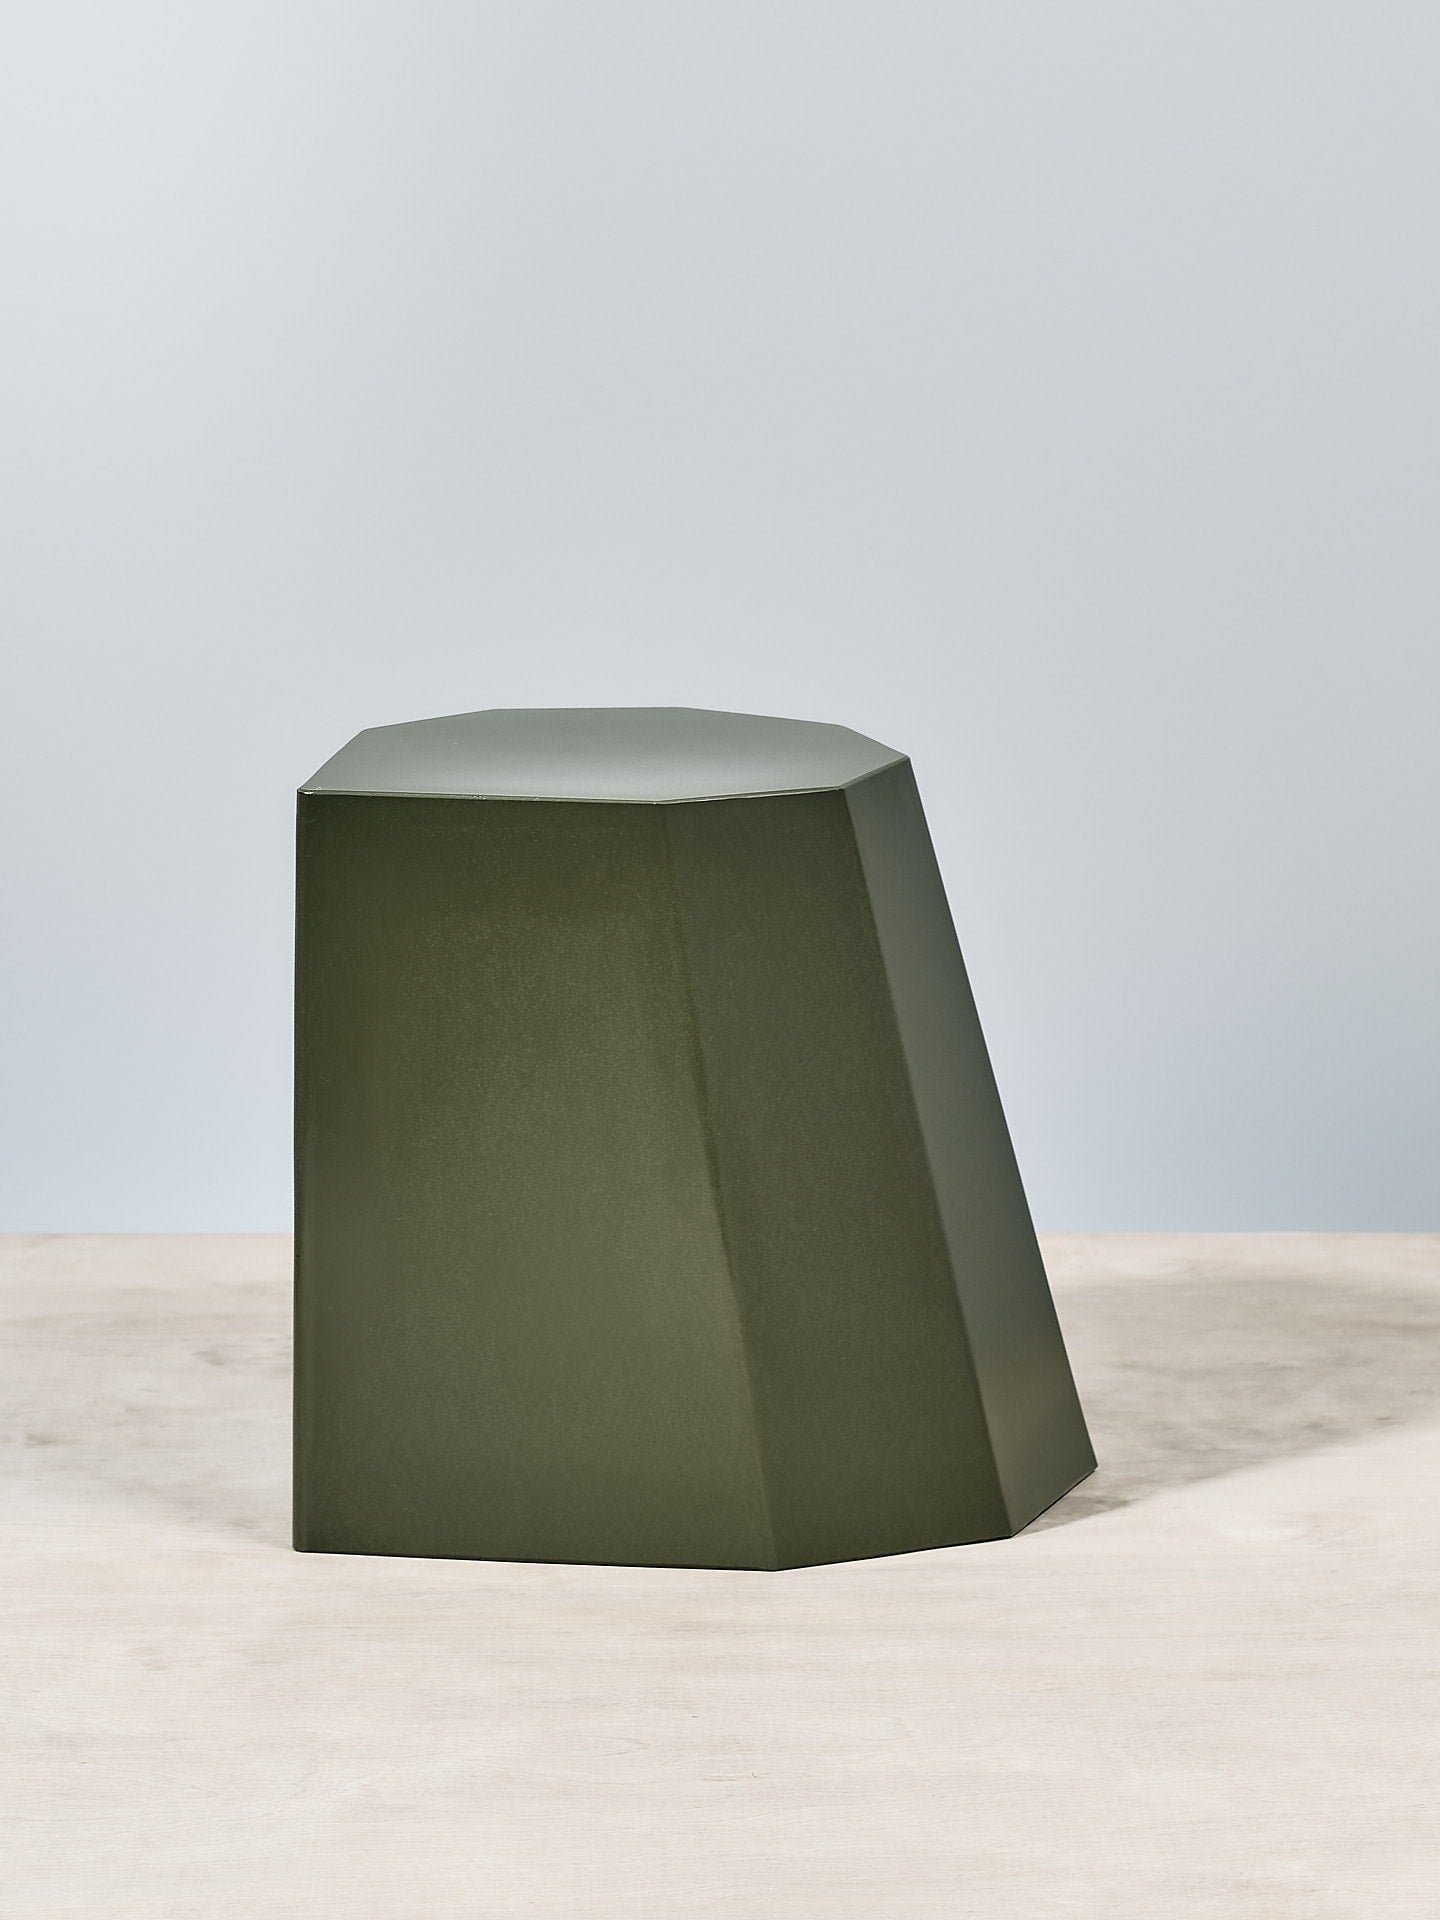 An Arnoldino Stool – Khaki by Martino Gamper on top of a wooden table.